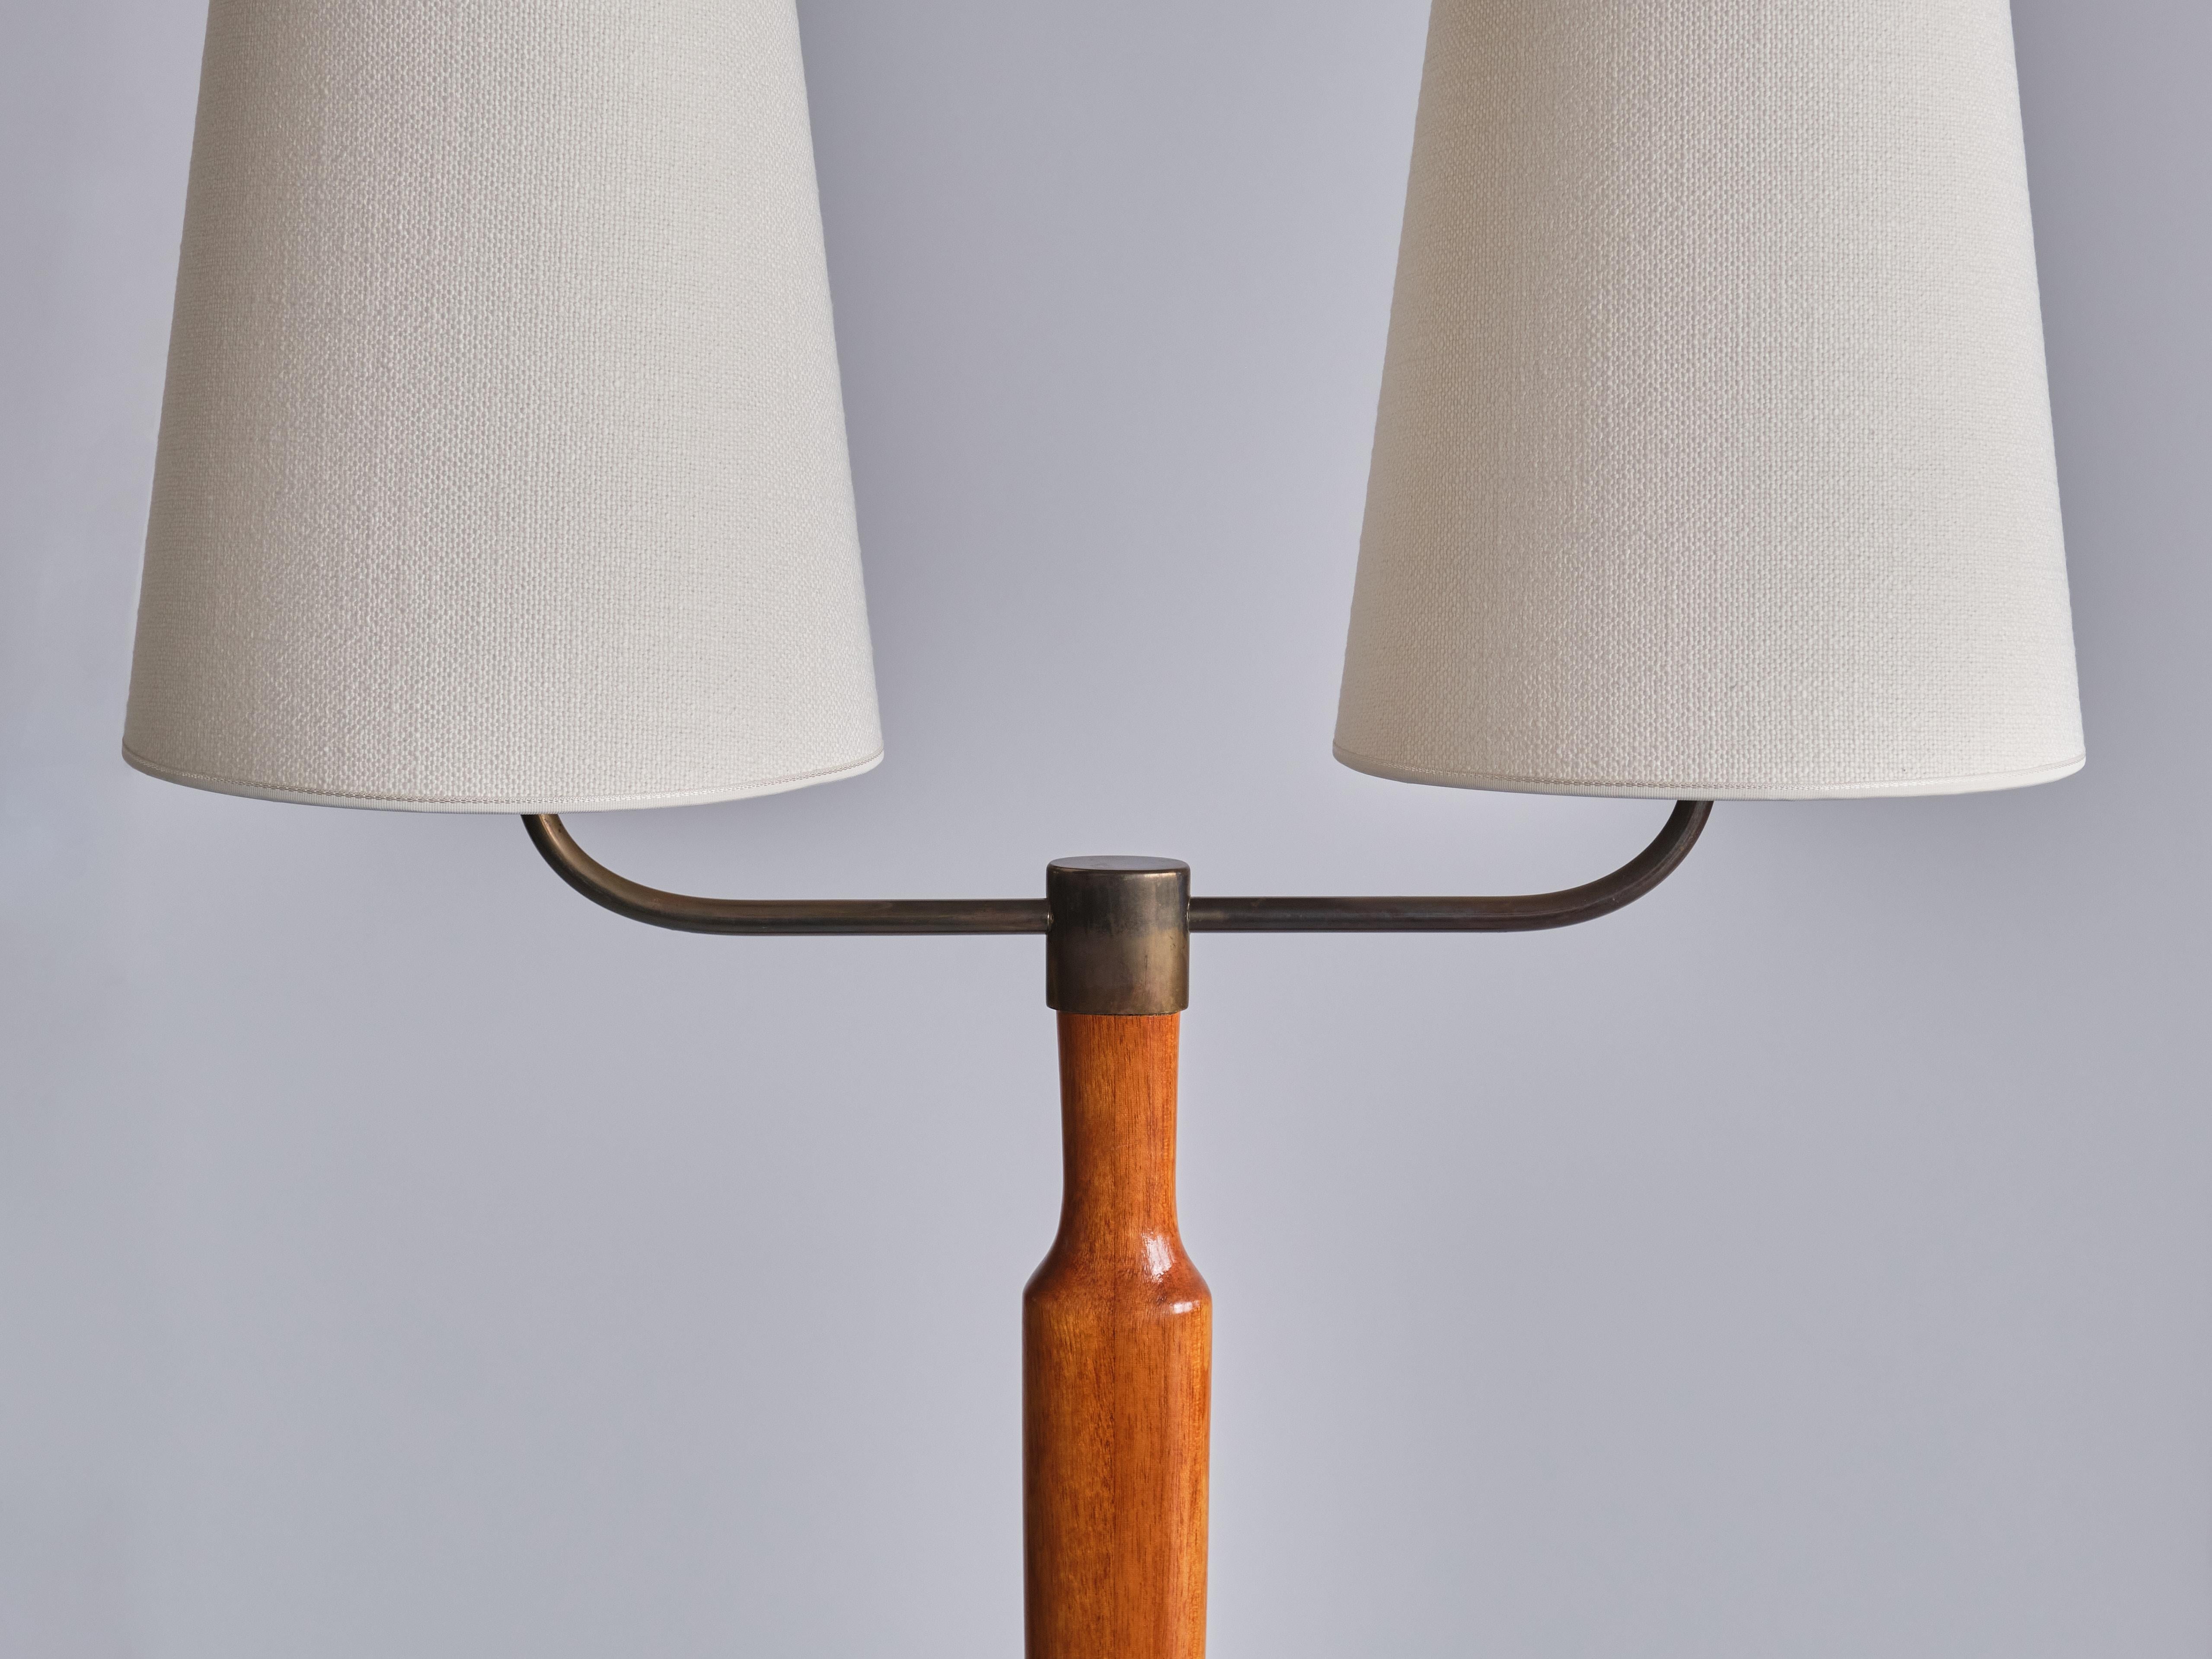 Mid-20th Century Swedish Modern Two Arm Floor Lamp in Teak Wood and Brass, Sweden, Late 1940s For Sale